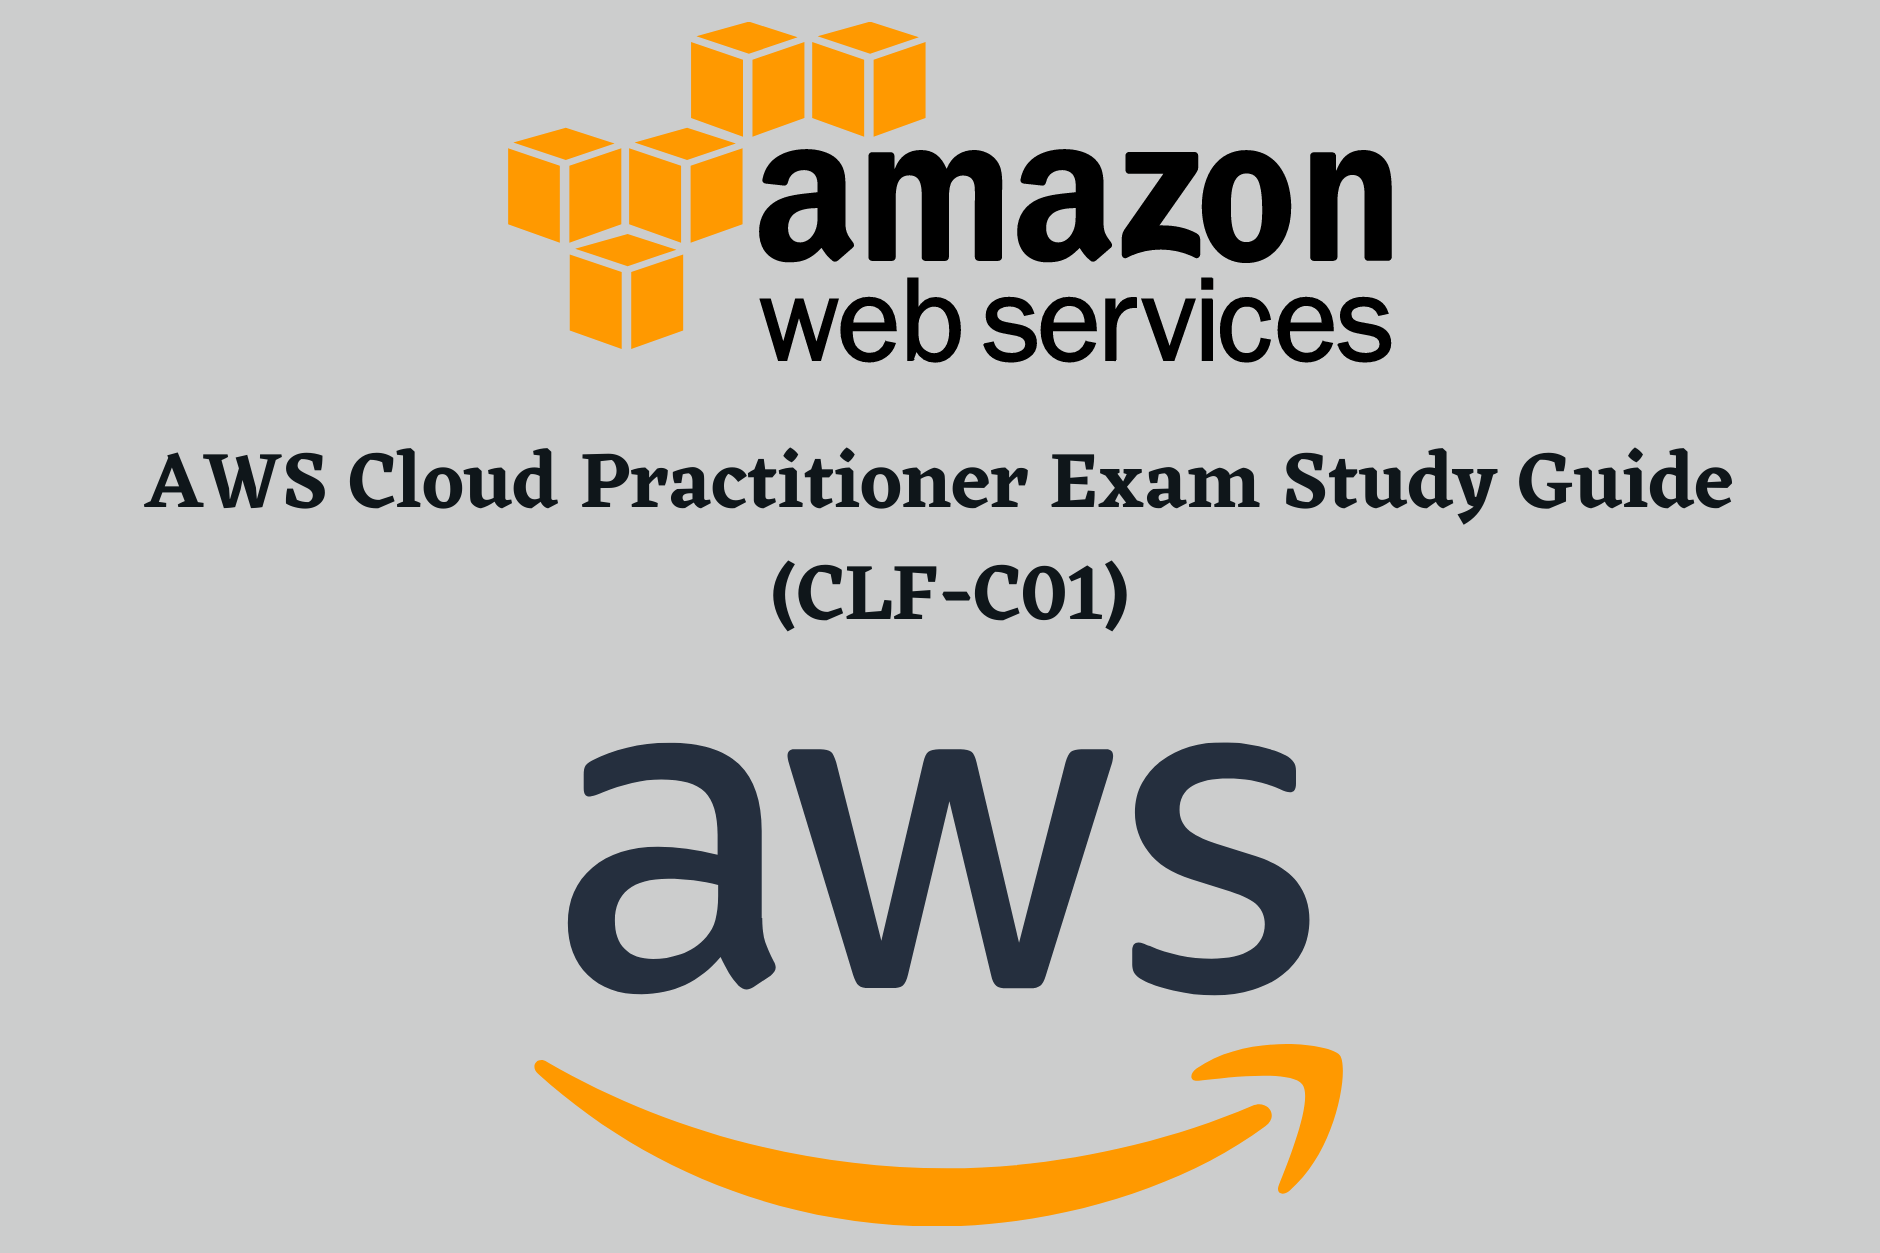 AWS Cloud Practitioner Exam Study Guide (CLF-C01)